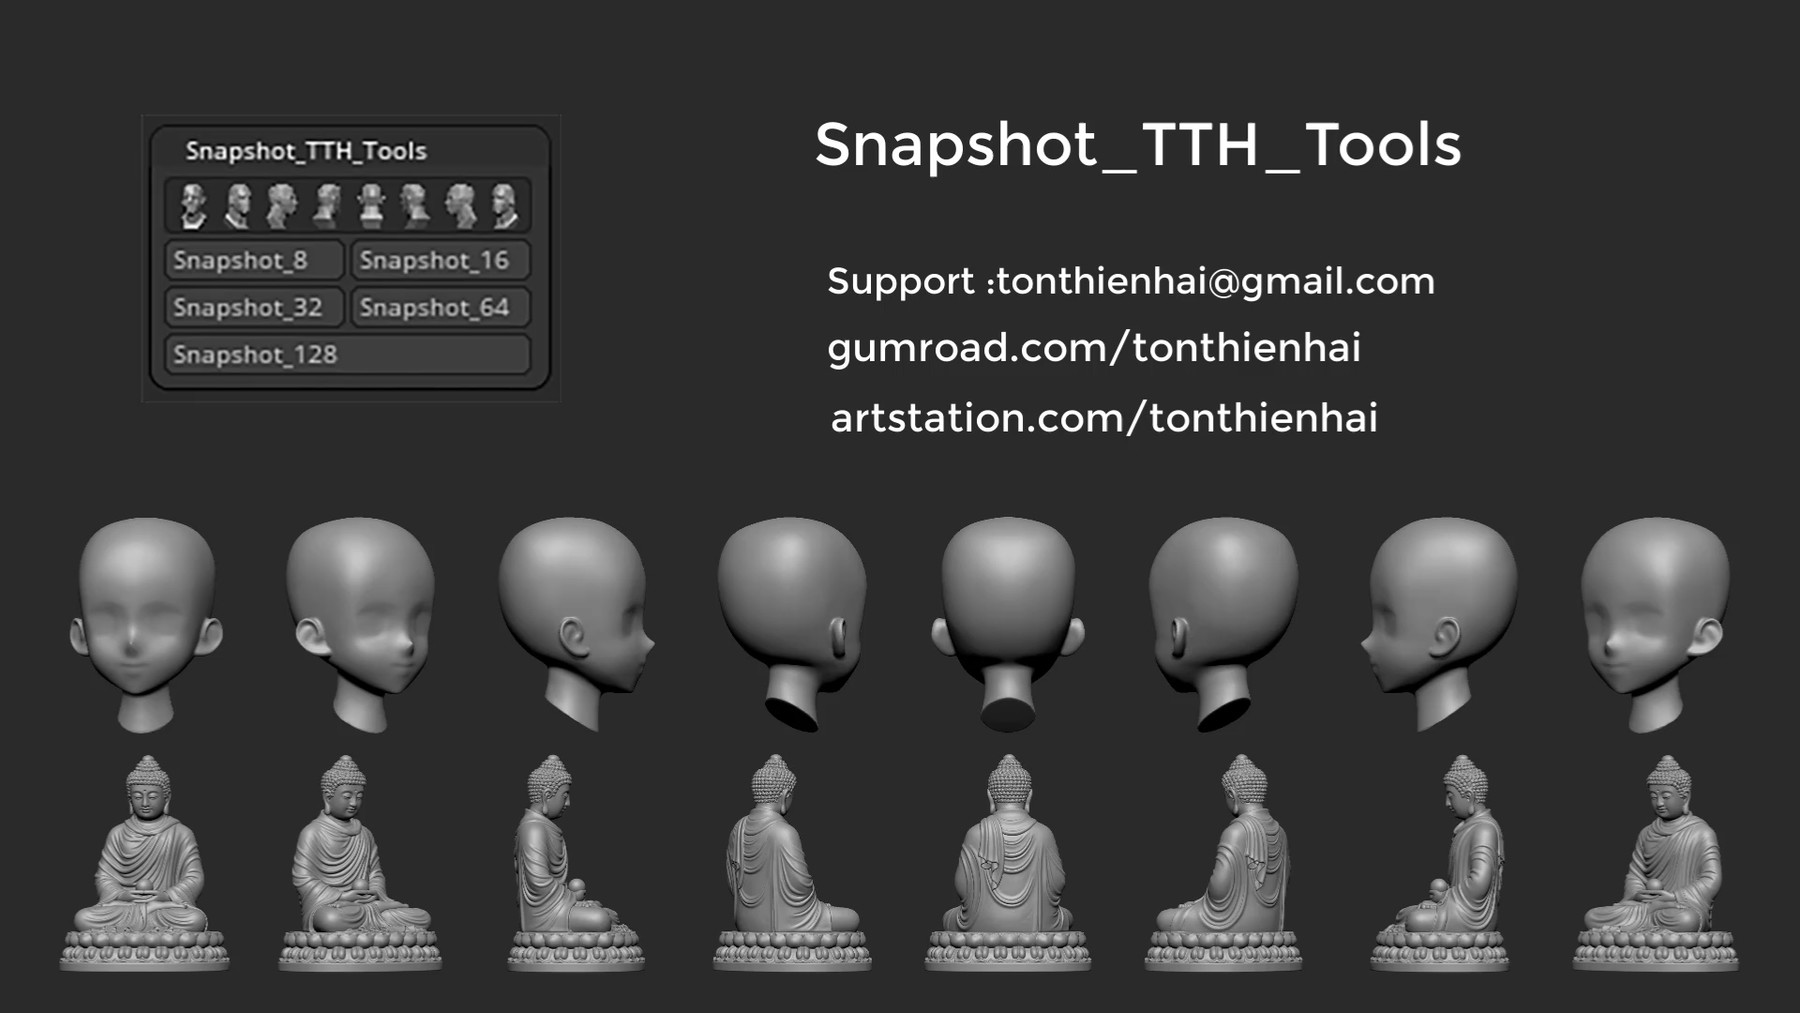 tool dissappears at certain angle zbrush